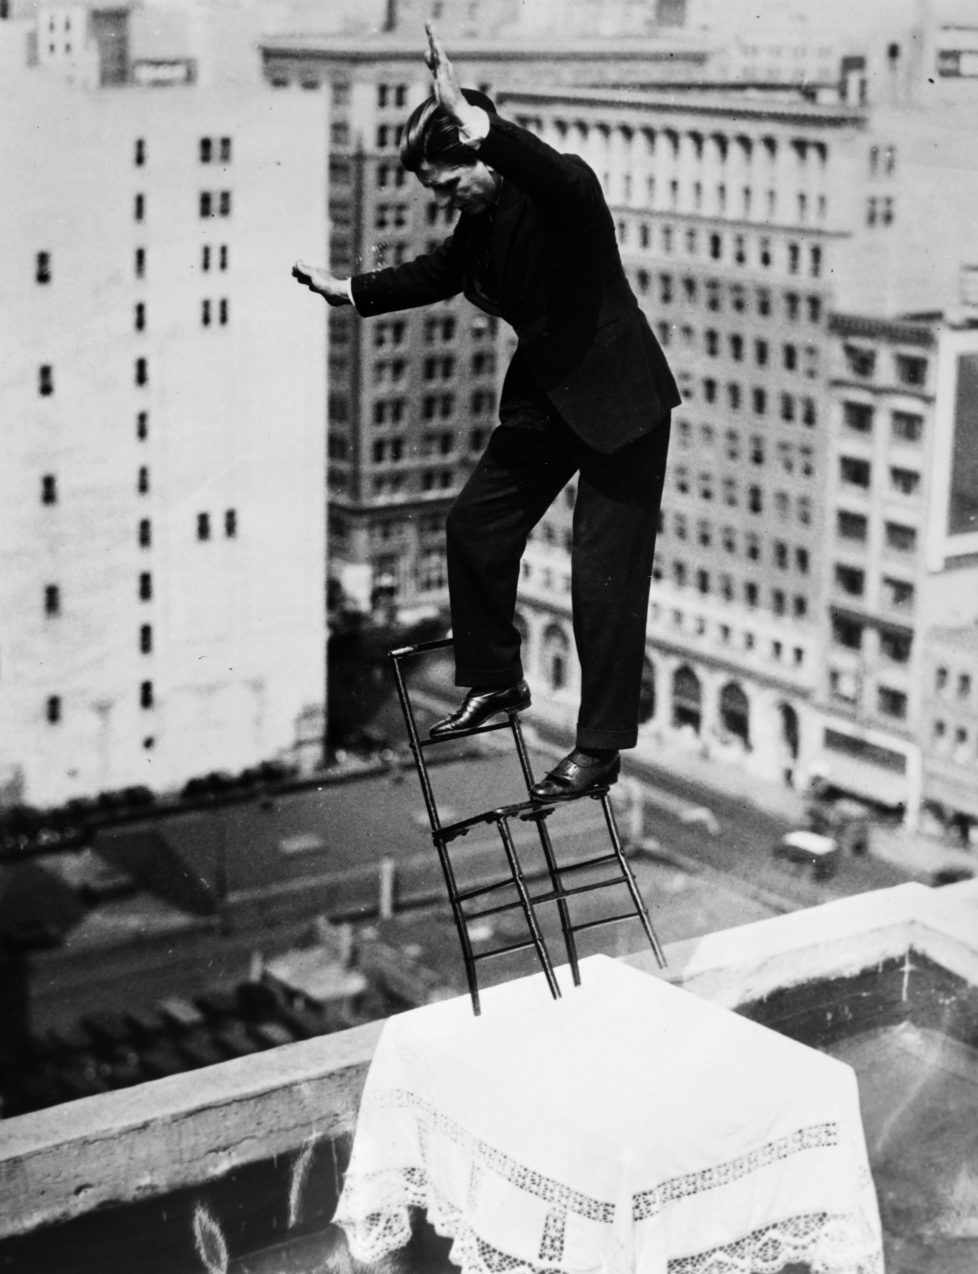 NEW YORK, NY - MARCH 25: French equilibrist Gilbert Bettancourt tests his balance on a chair resting on a table with only two legs, close to the edge of the building roof on March 25, 1932 in New York City. (Photo by Gamma-Keystone via Getty Images)